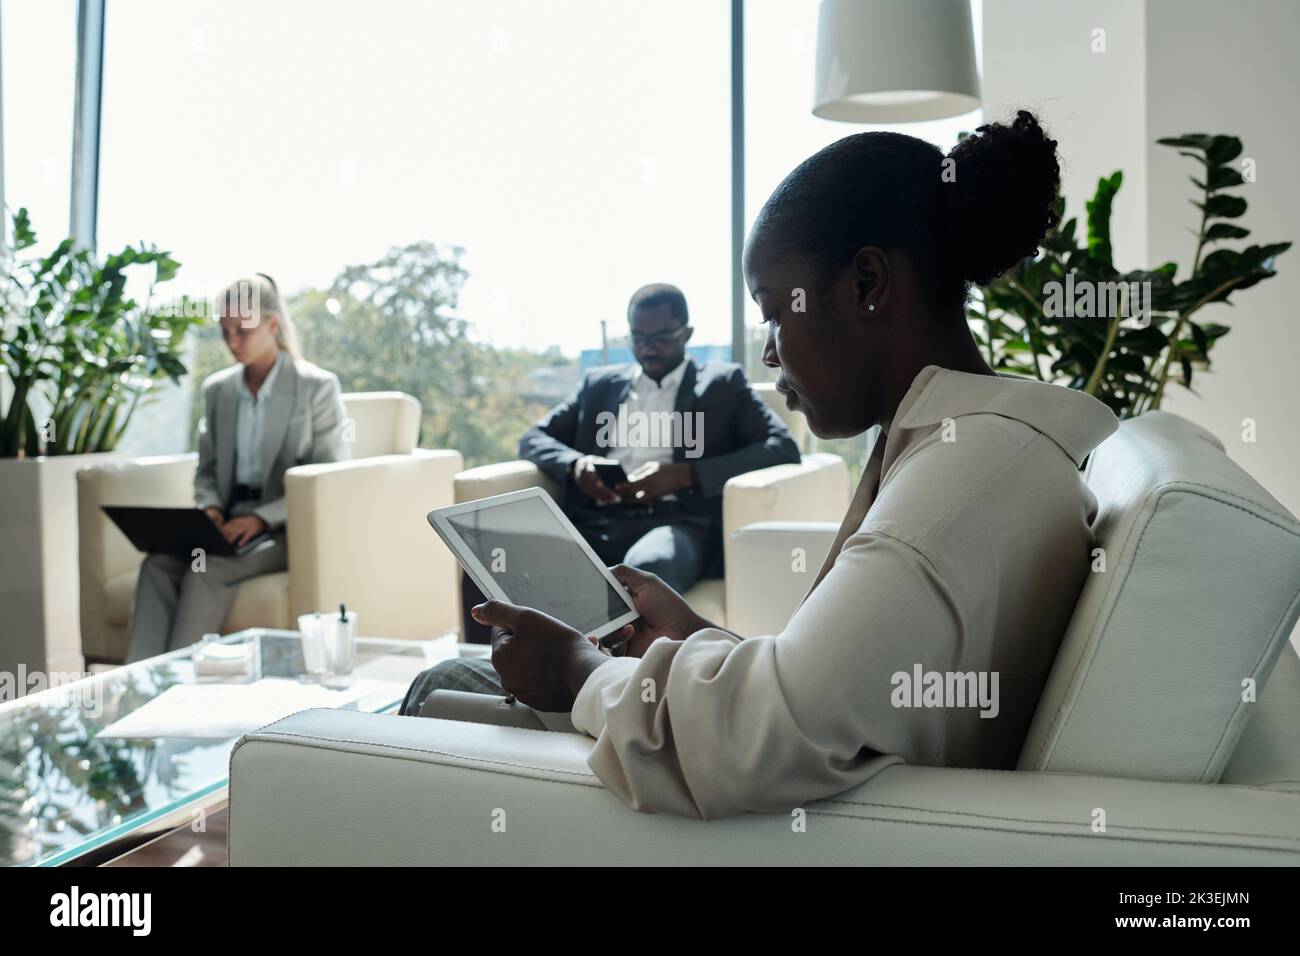 Side view of young serious female office worker with tablet sitting on white leather couch in openspace office against two coworkers Stock Photo